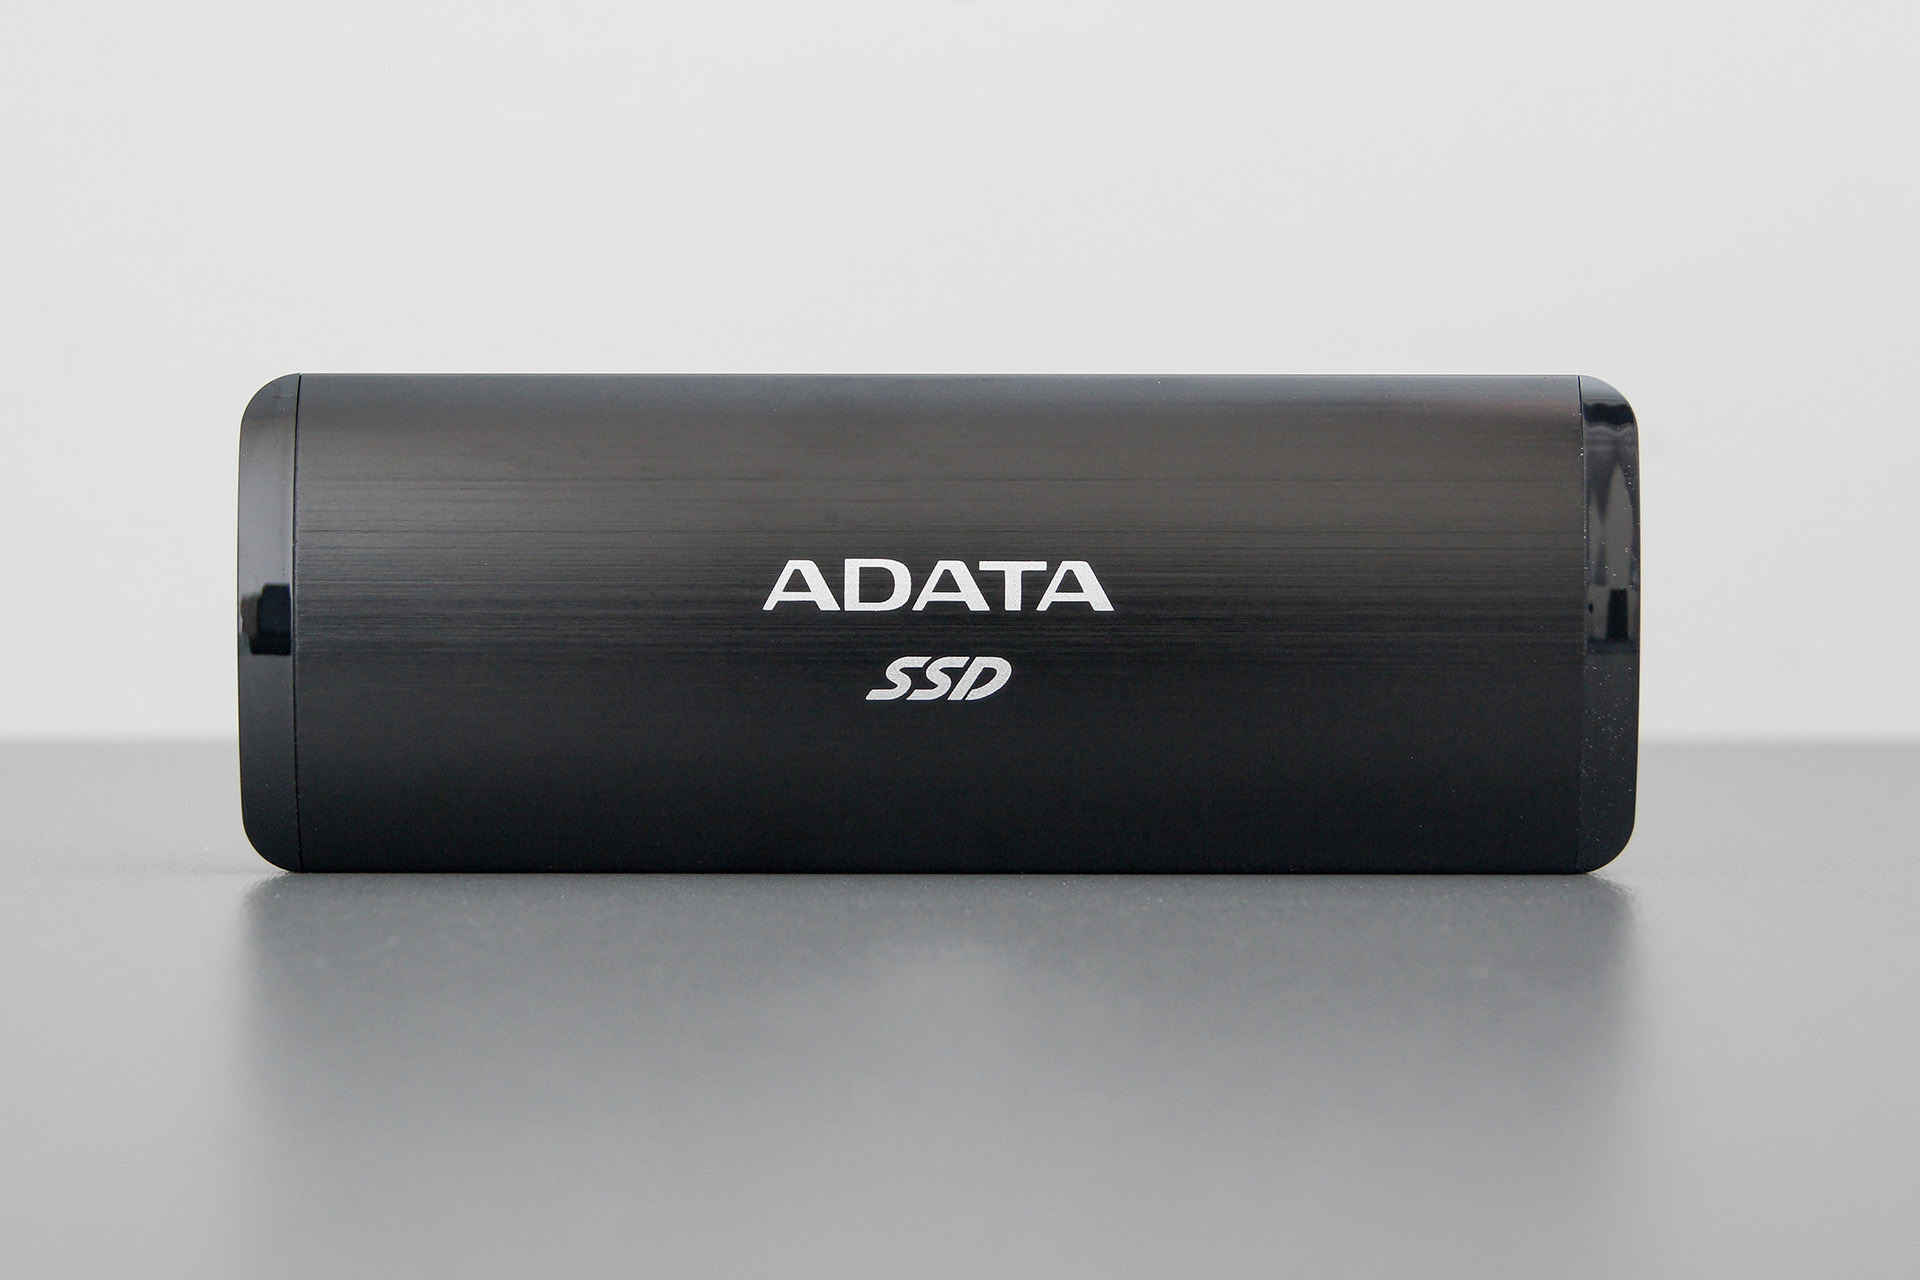 A-Data SE760 512 GB review. Fast portable SSD - My, SSD, Data, Data Retention, USB type-c, Adata